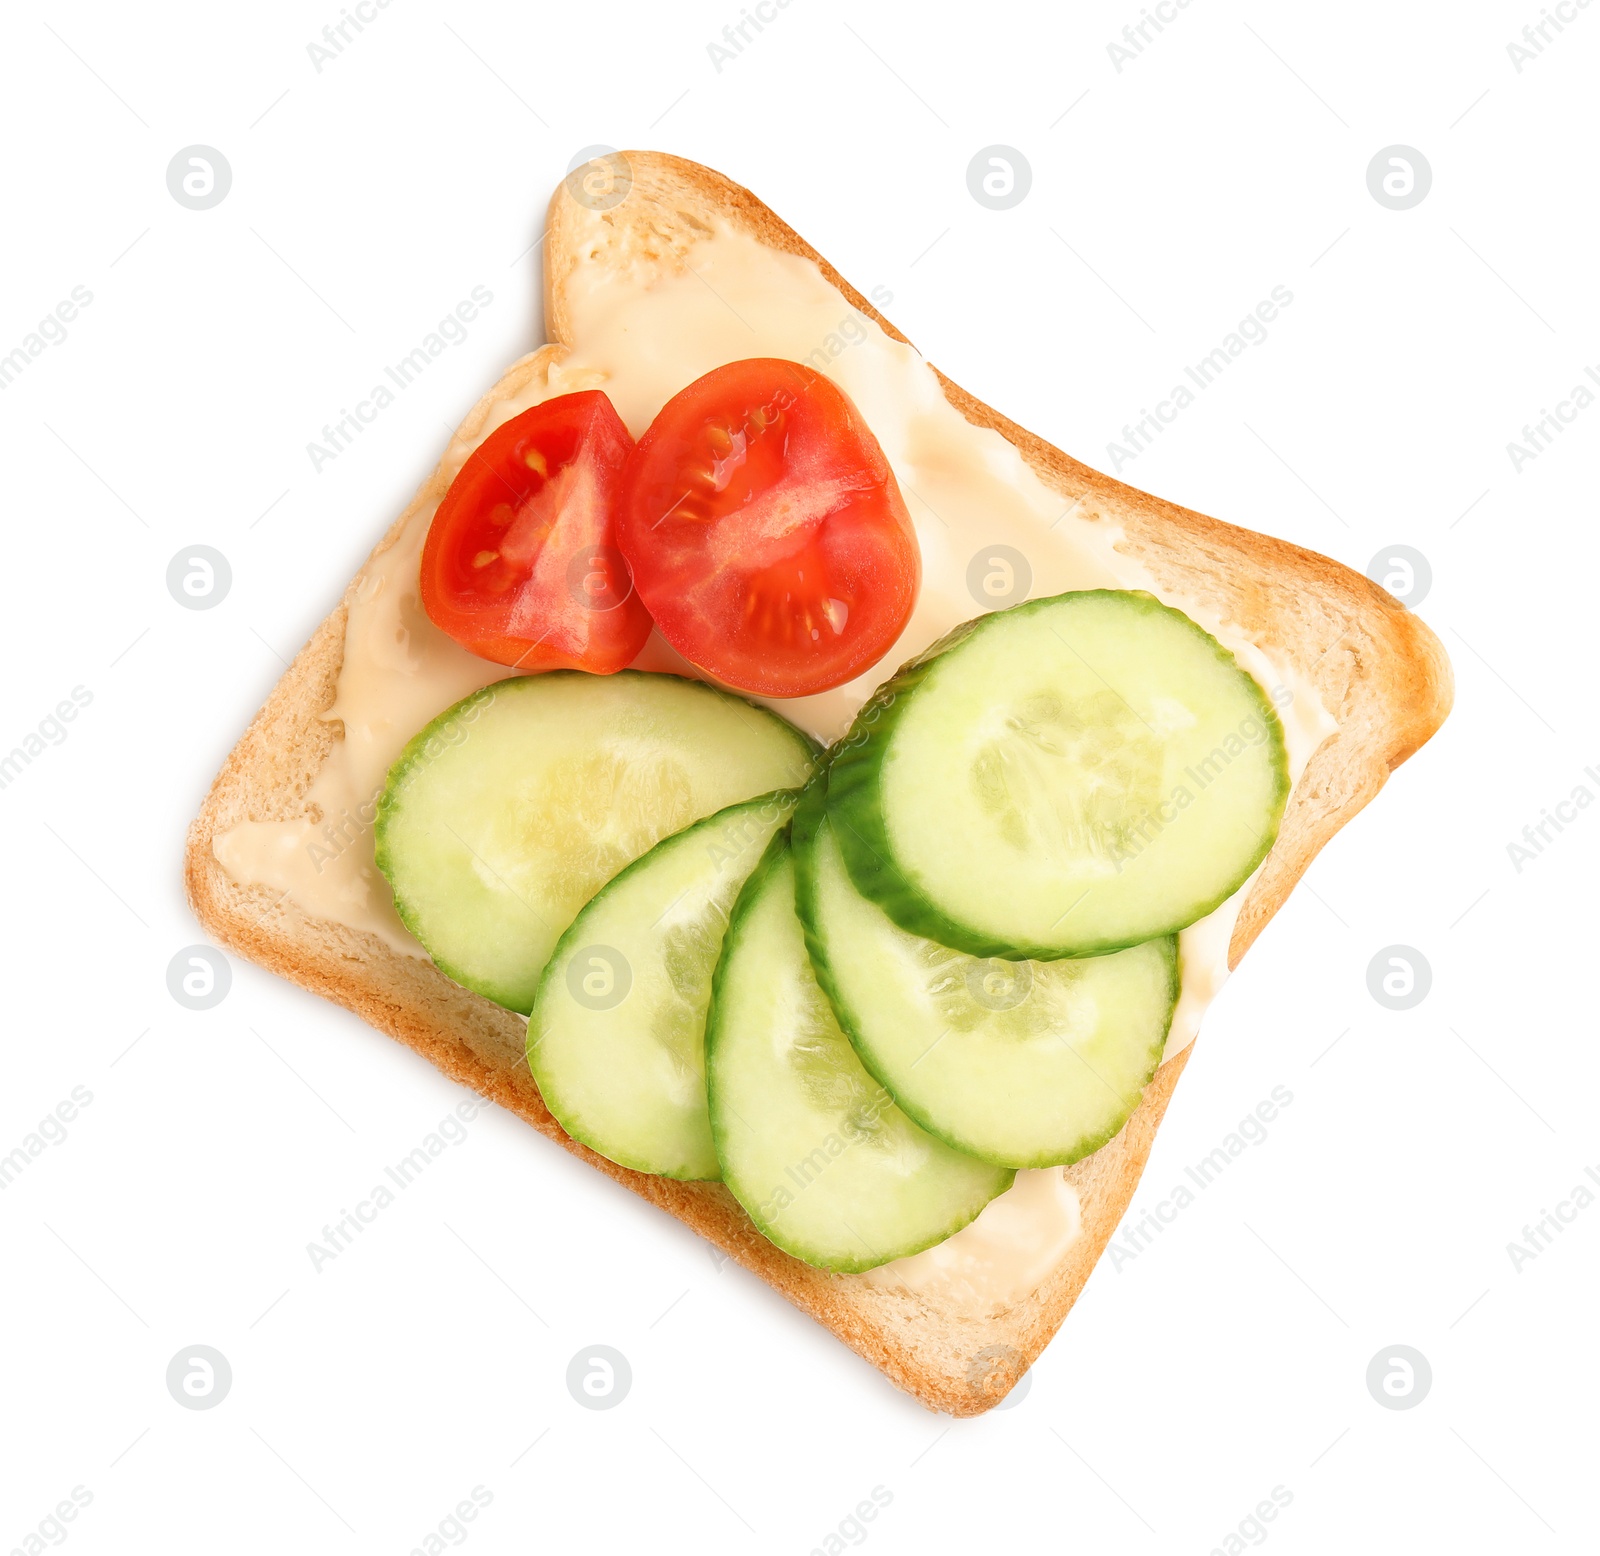 Photo of Slice of bread with spread and vegetables on white background, top view